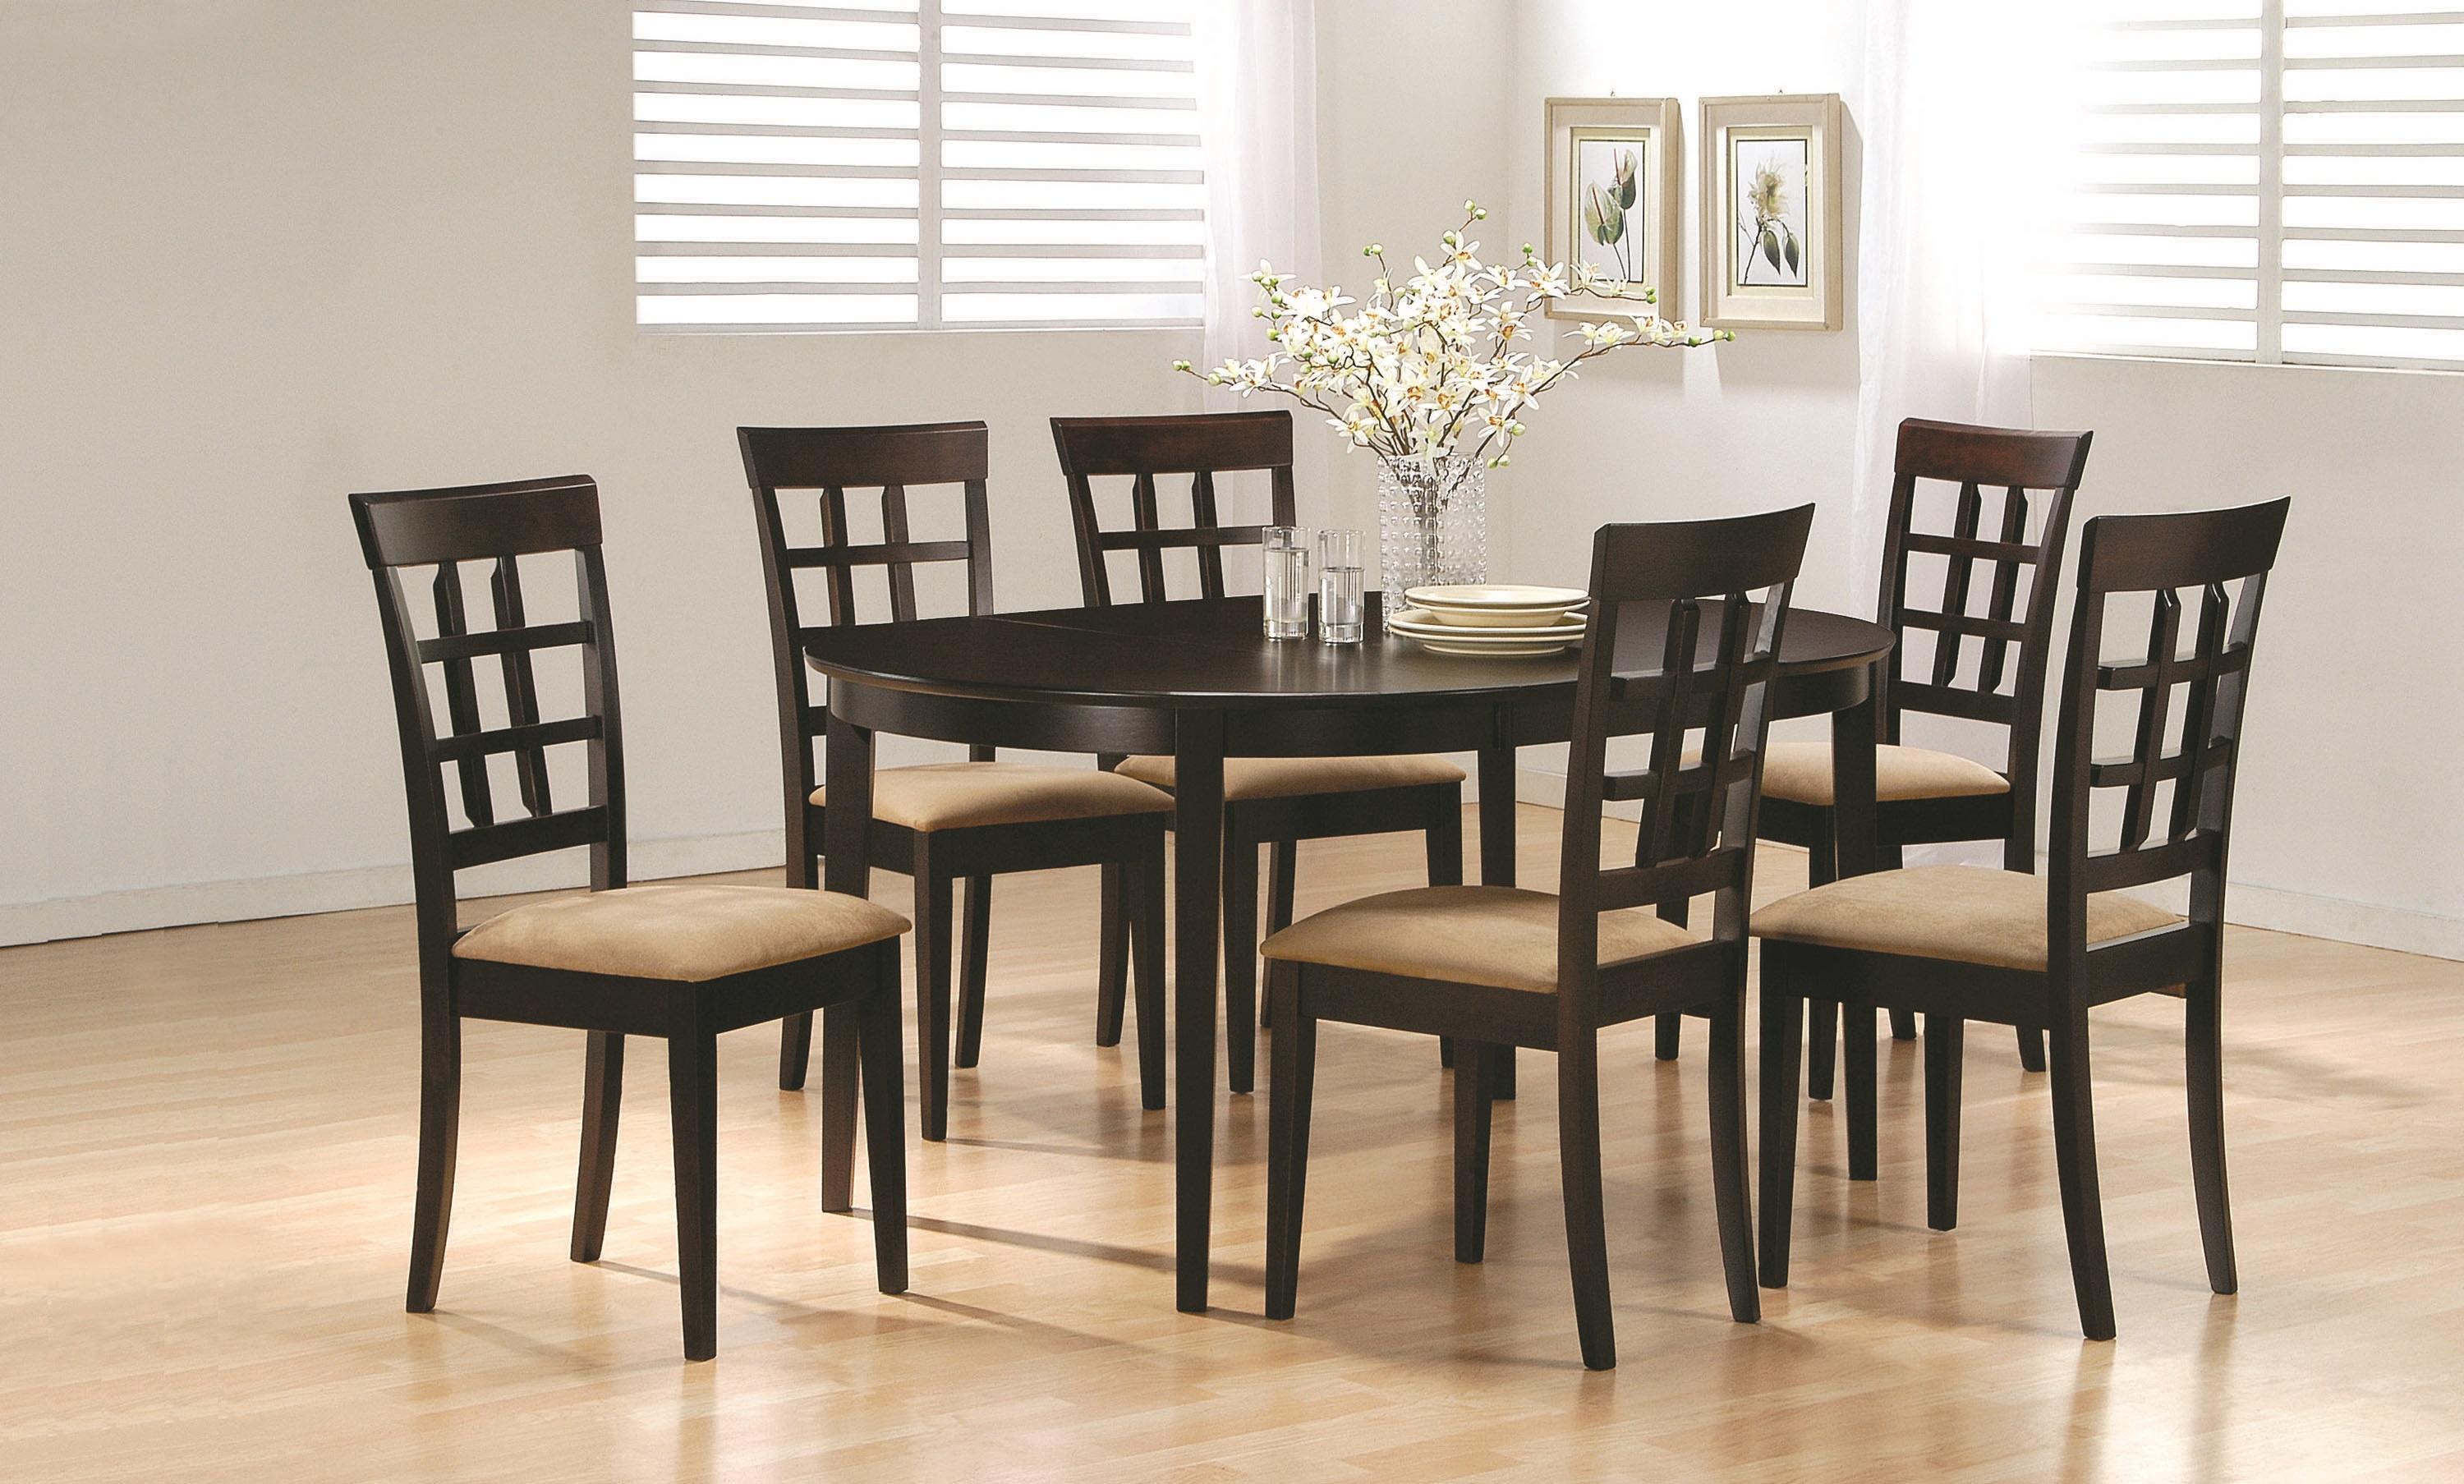 Transitional Dining Room Set 100770-S5 Gabriel 100770-S5 in Cappuccino Microfiber